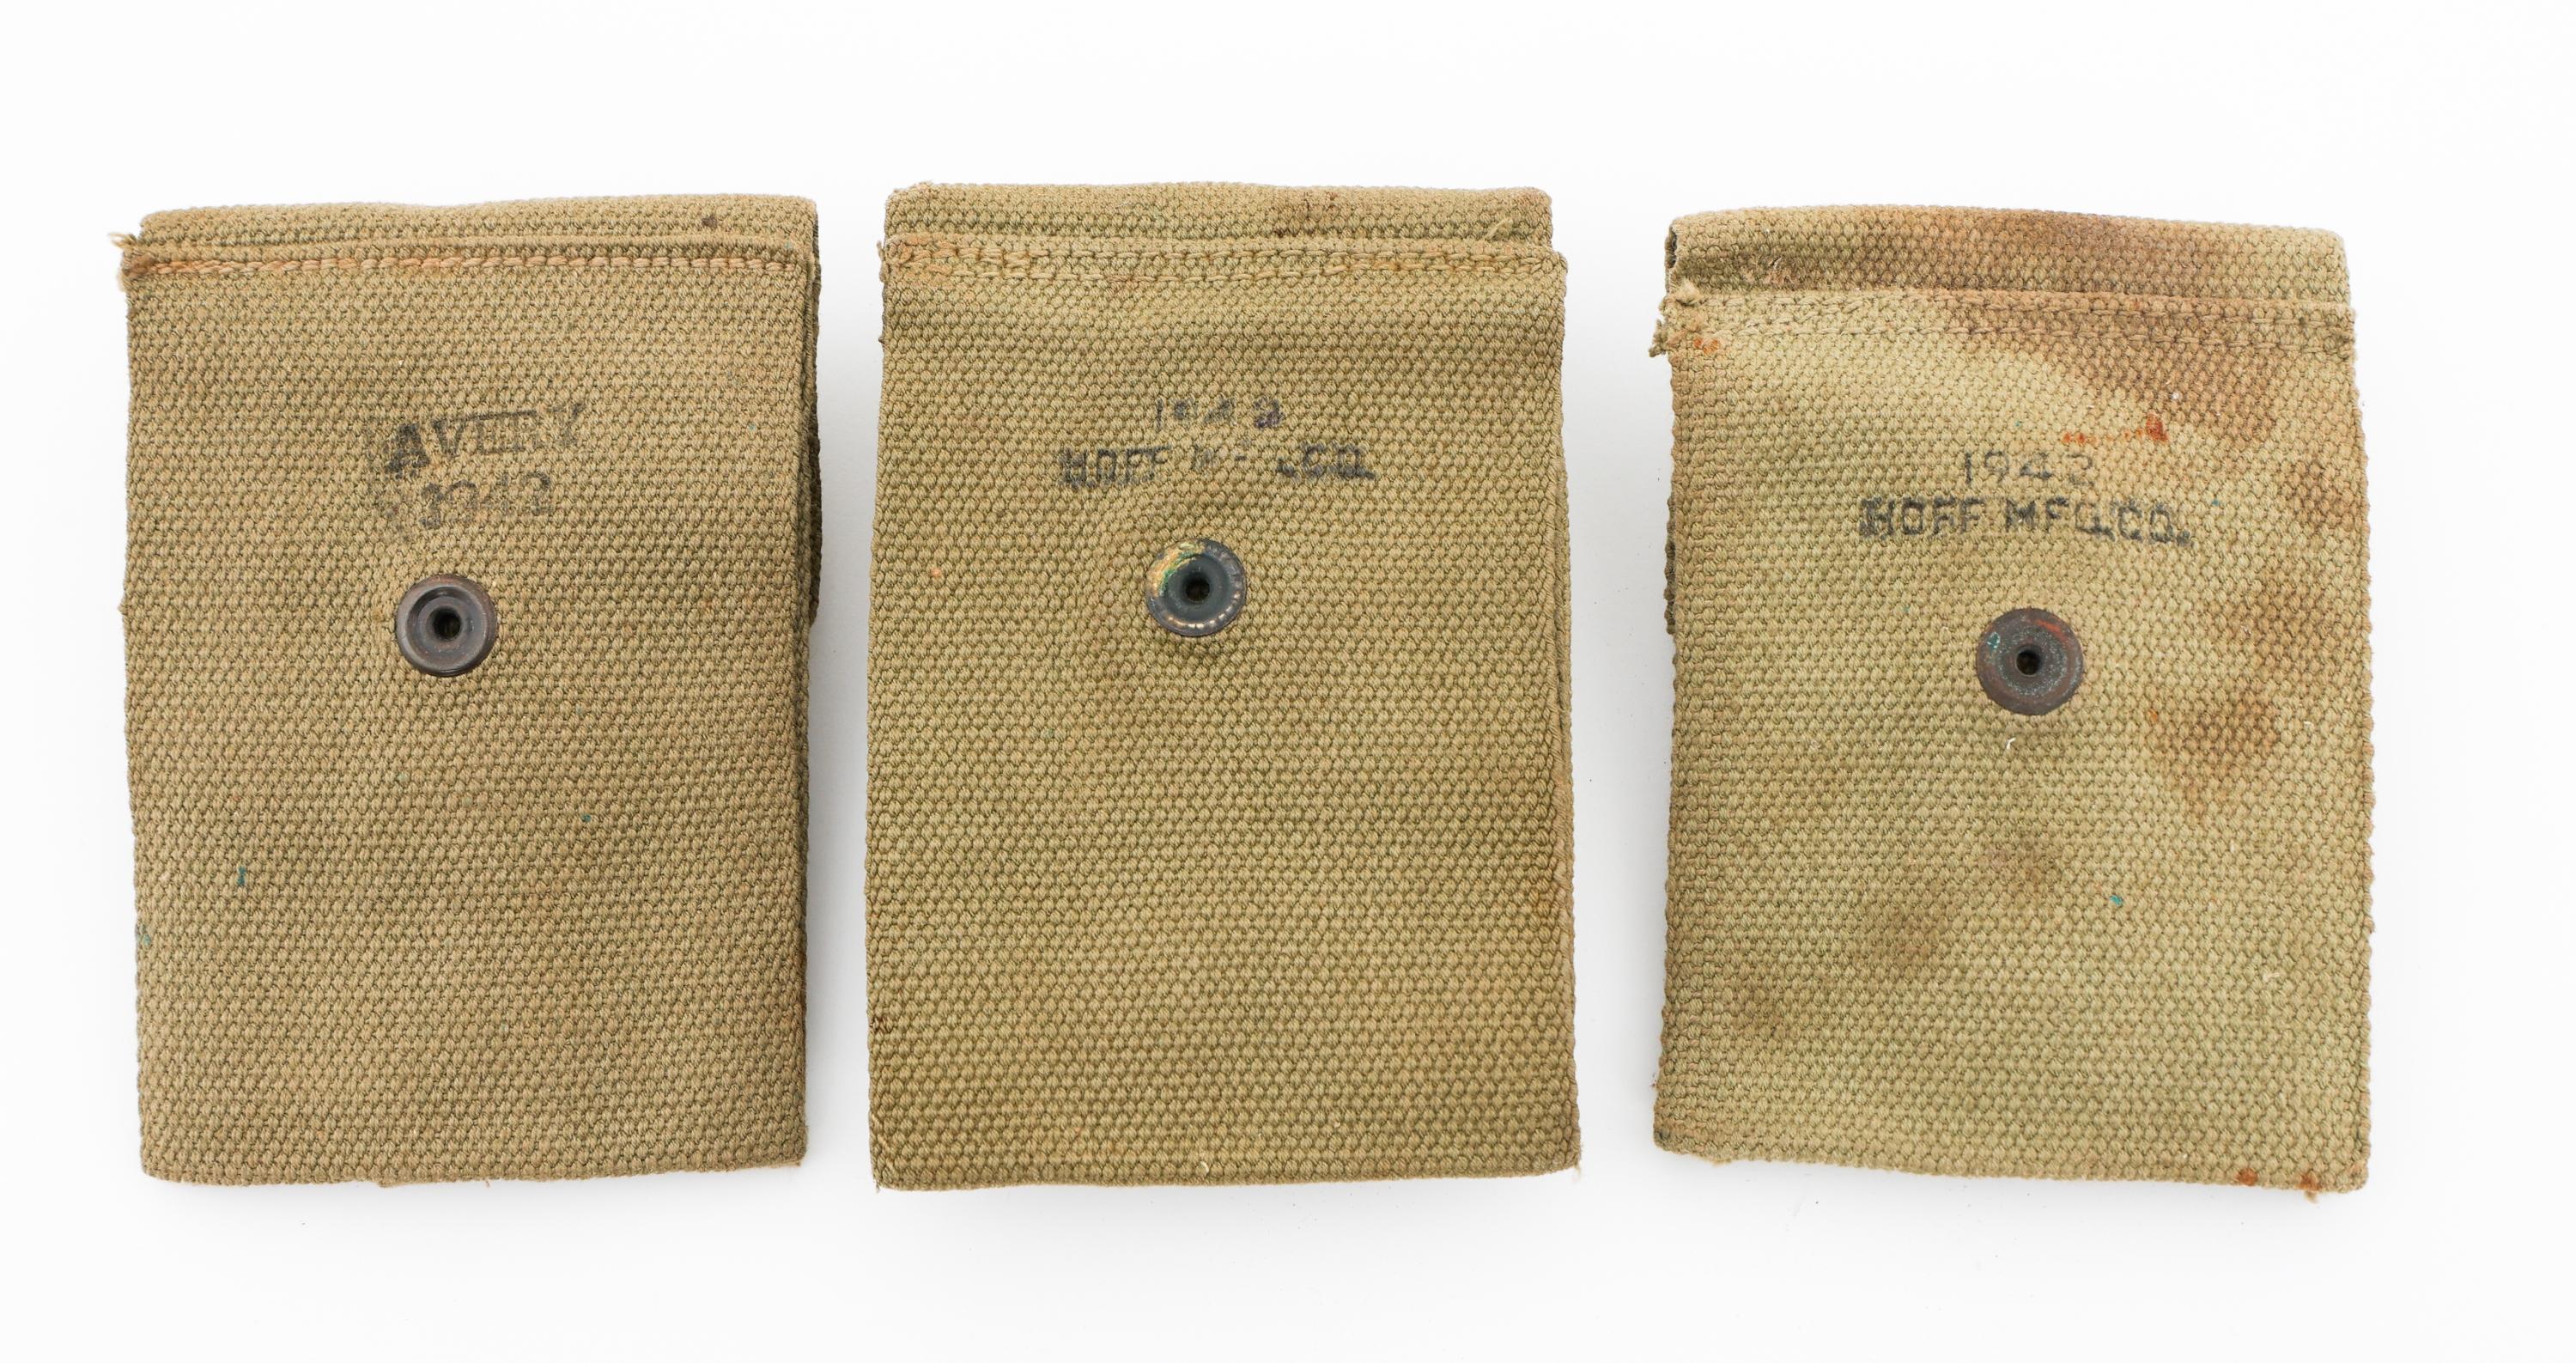 WWI - WWII US M1911 PISTOL MAGAZINES & POUCHES